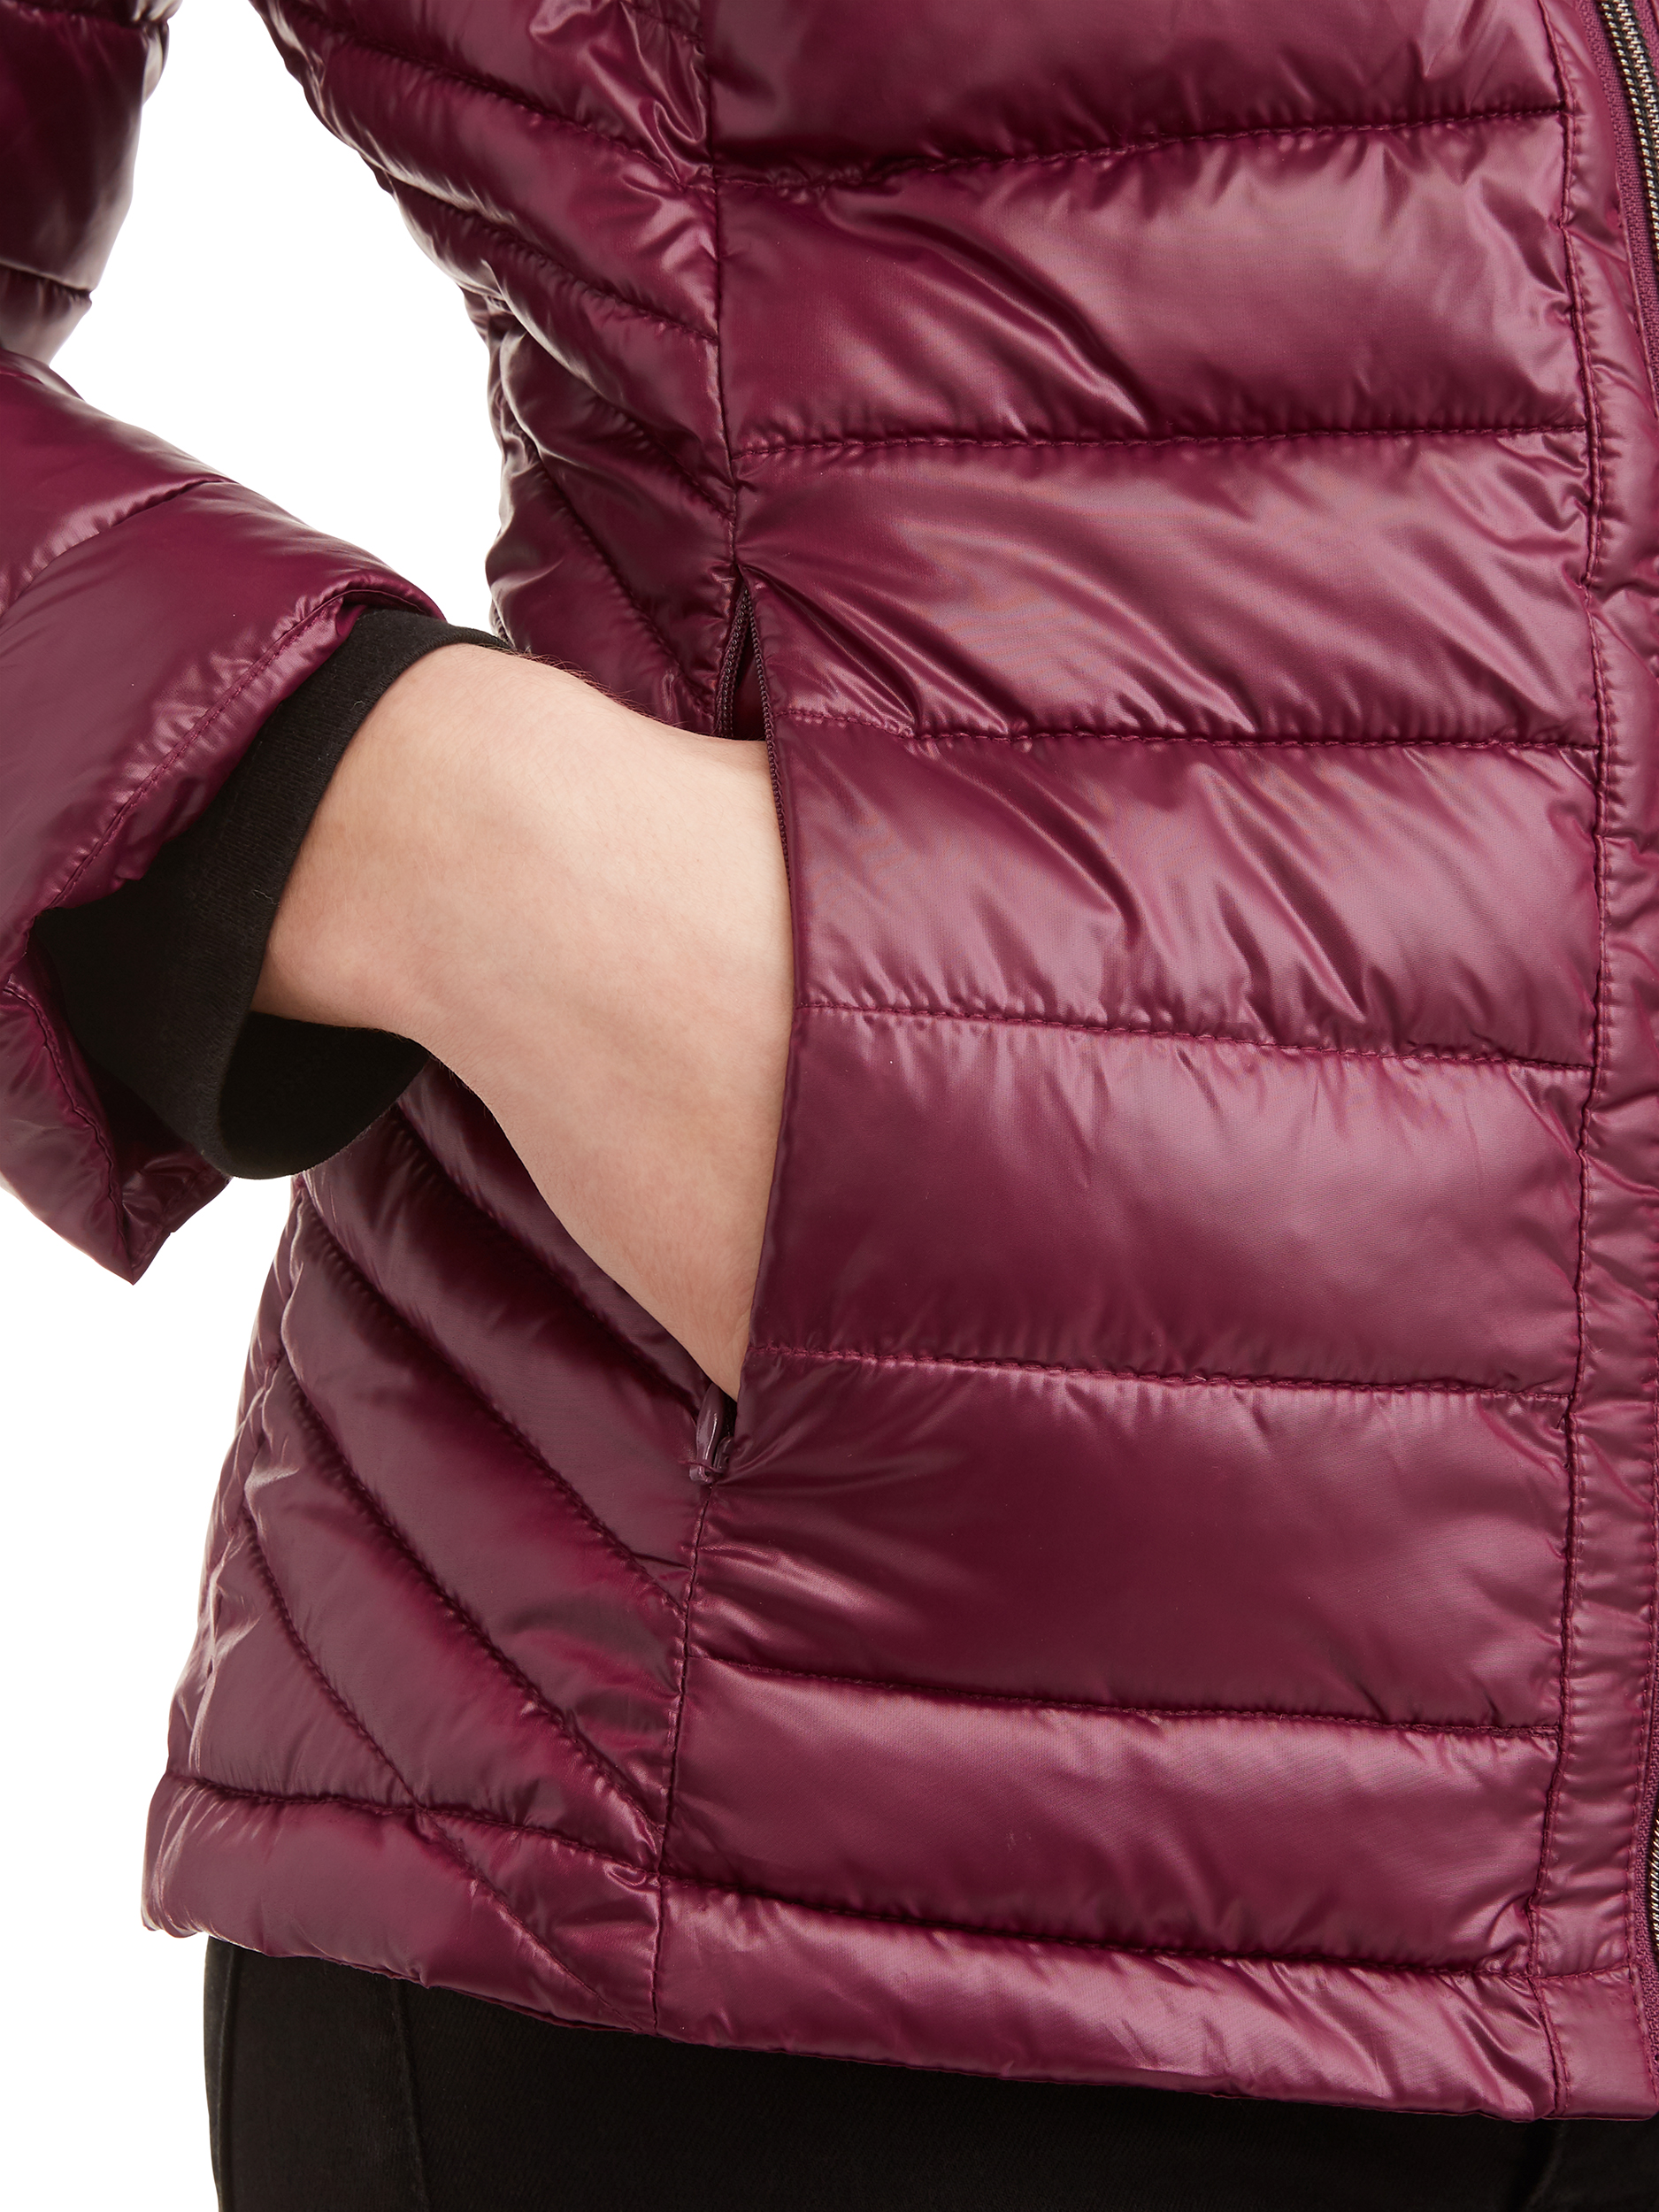 Women's Down Blend Quilted Jacket with Convertible Collar - image 5 of 5